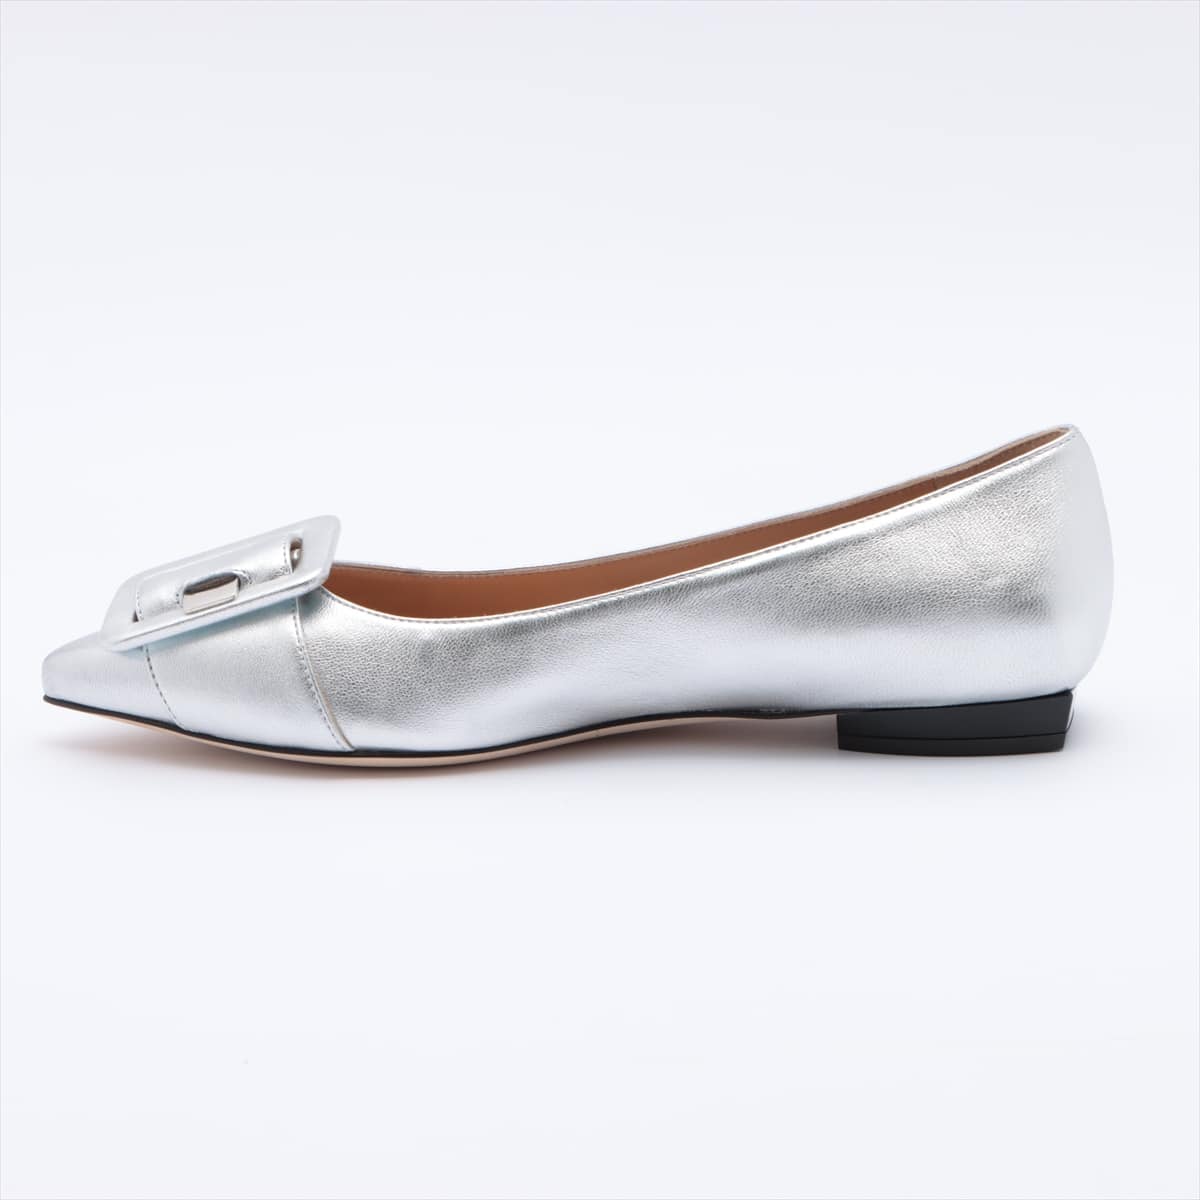 Sergio Rossi Leather Flat Pumps 36.5 Ladies' Silver